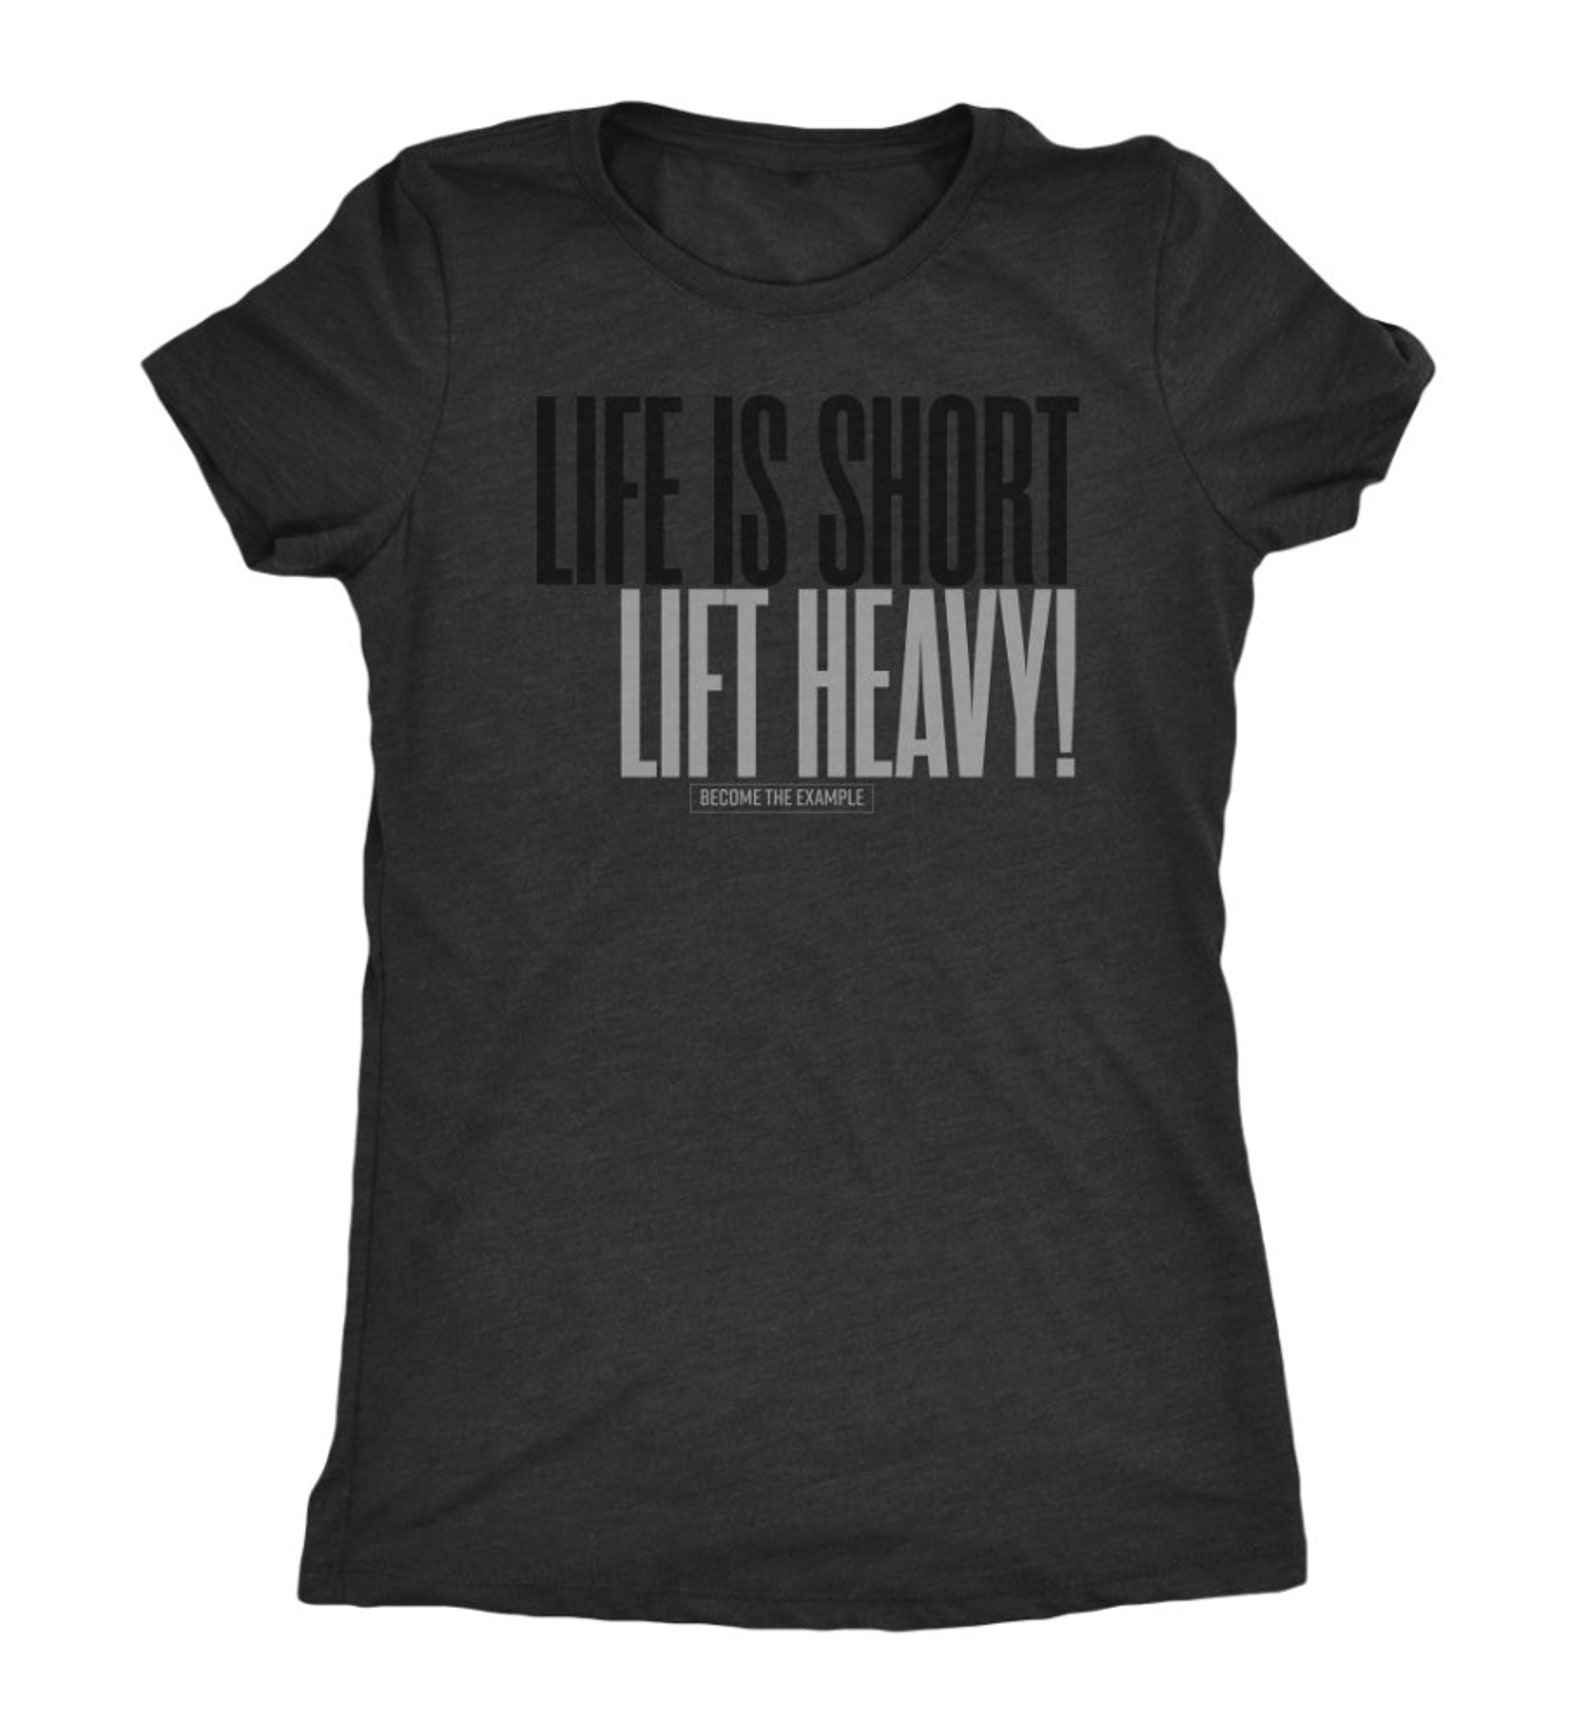 Life is Short Lift Heavy Ladies T-shirt Funny Workout | Etsy